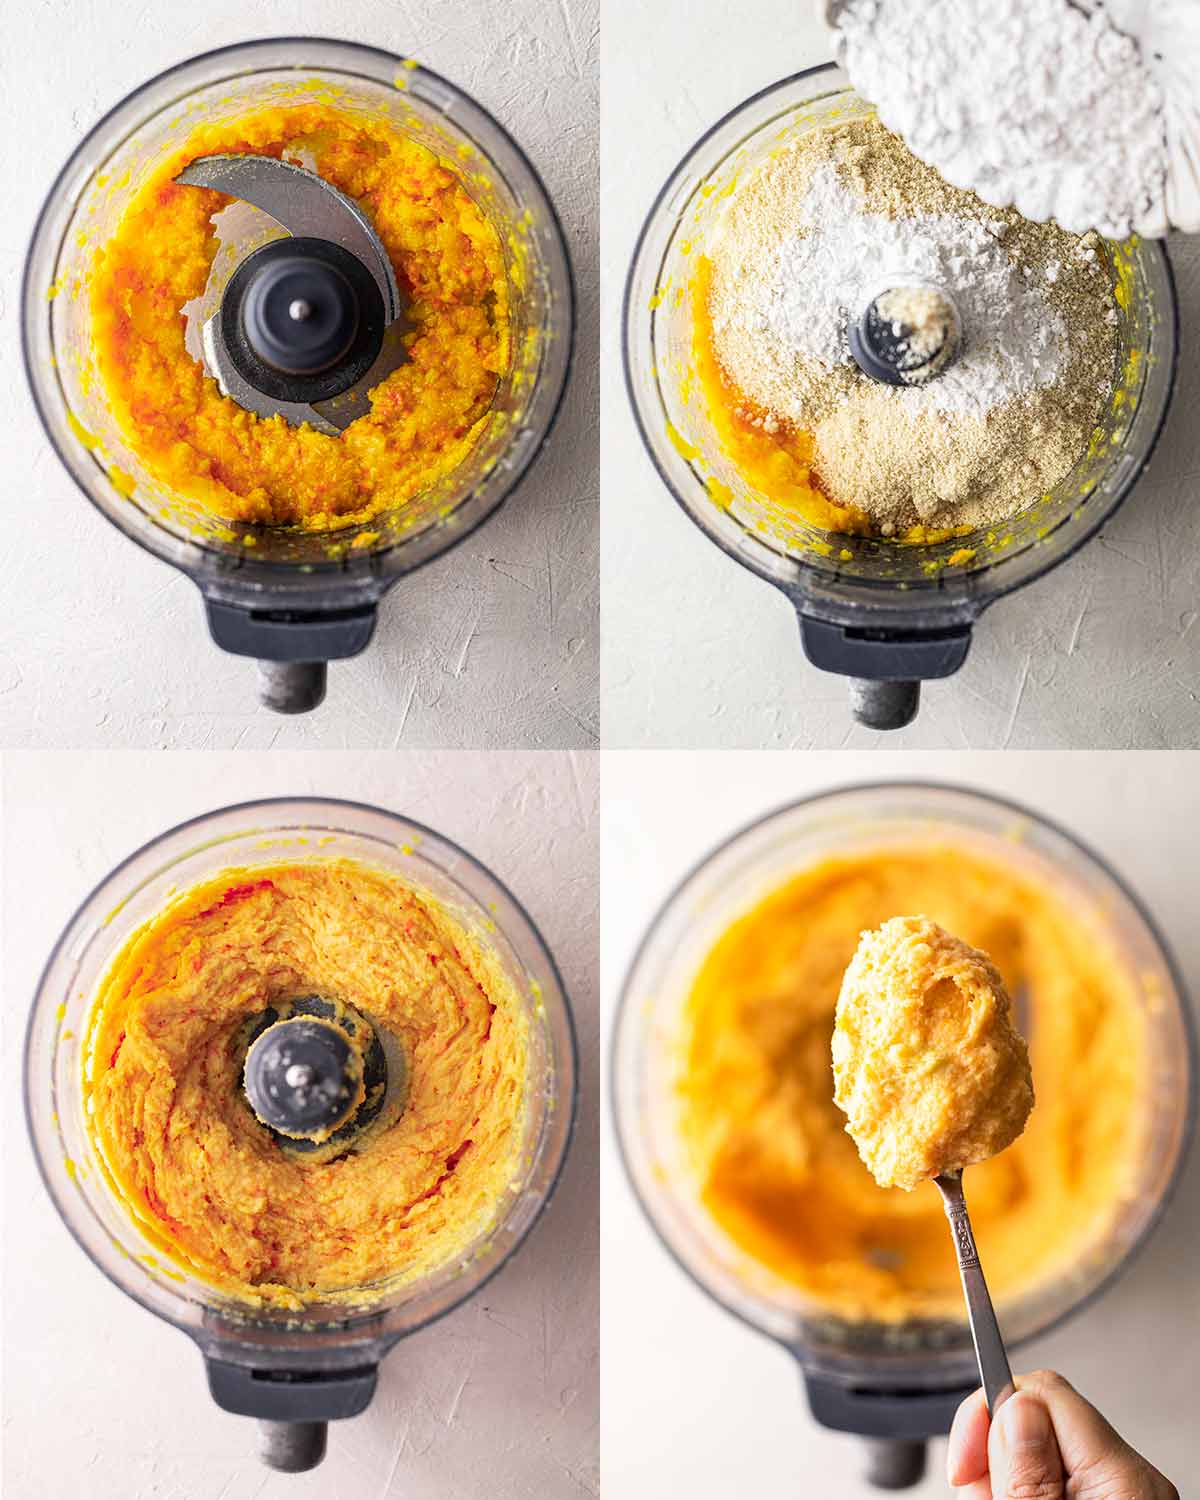 Four image collage of making the orange cake in a food processor